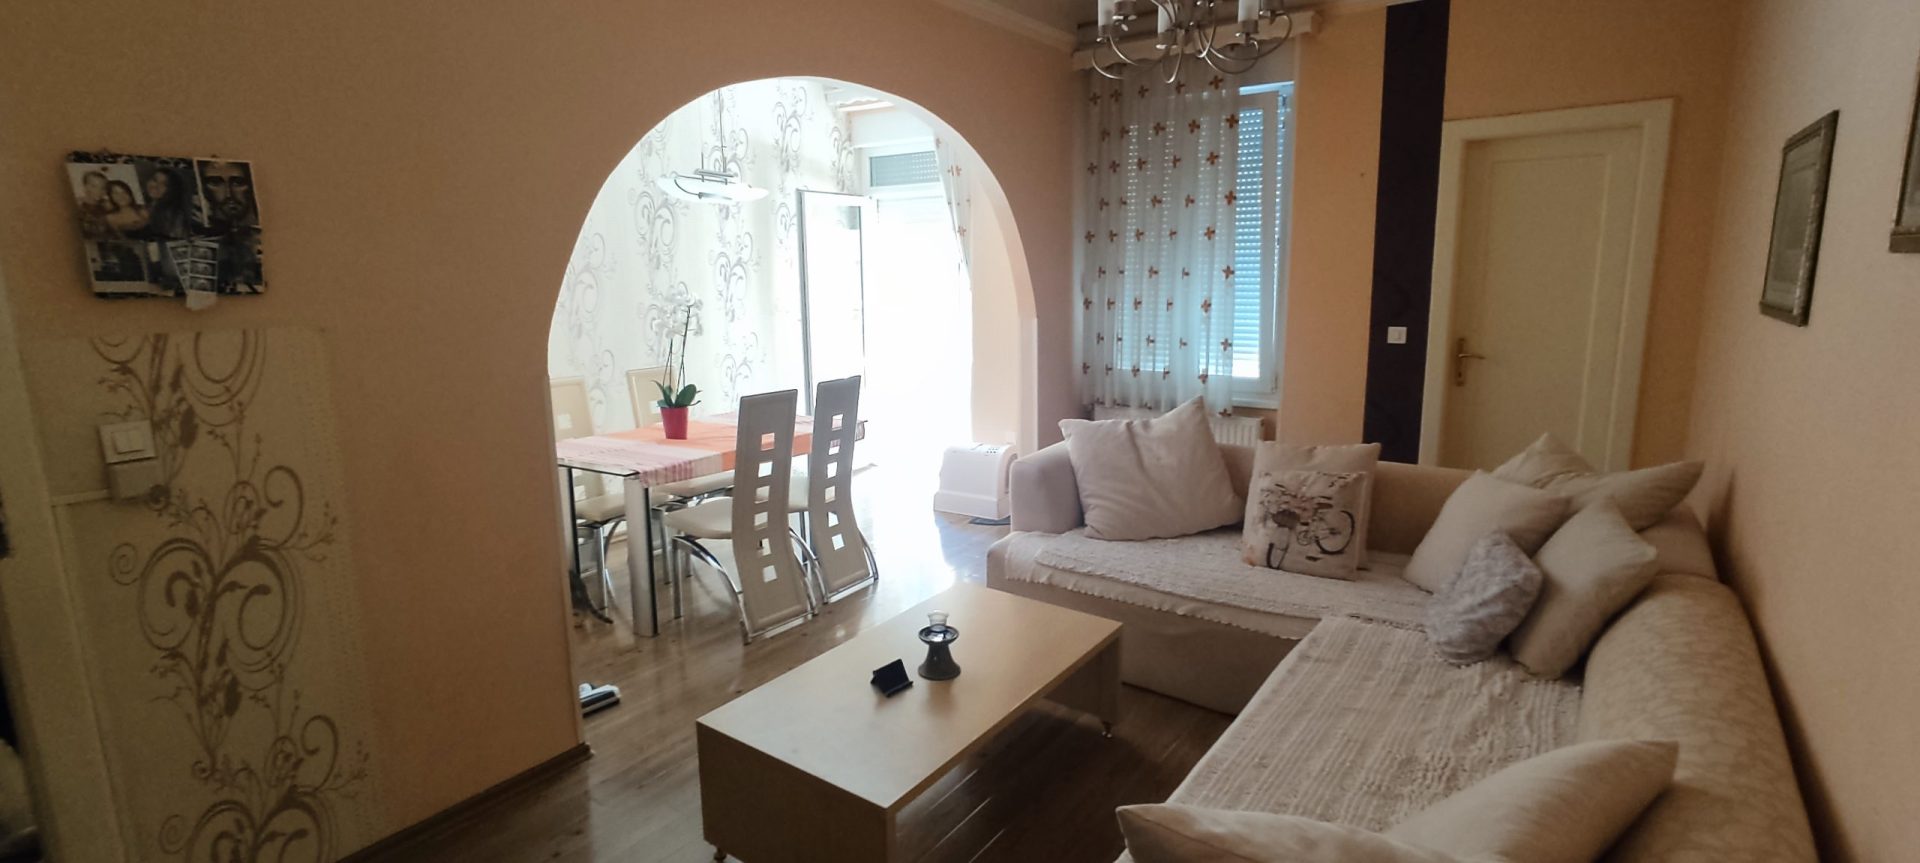 Apartment for sale in the center of Sarajevo